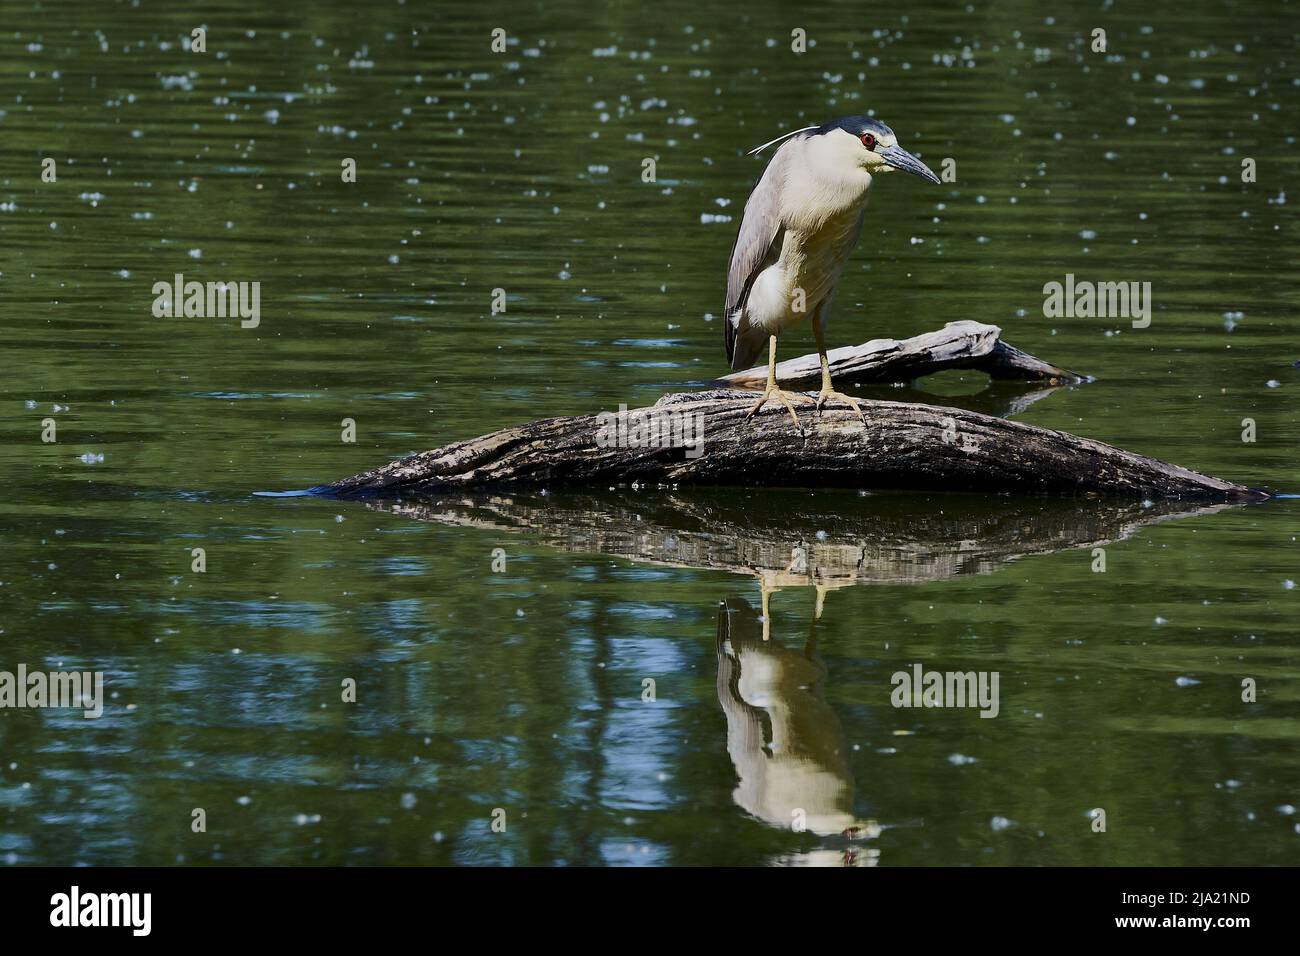 Black-crowned night heron on a log in a pond Stock Photo